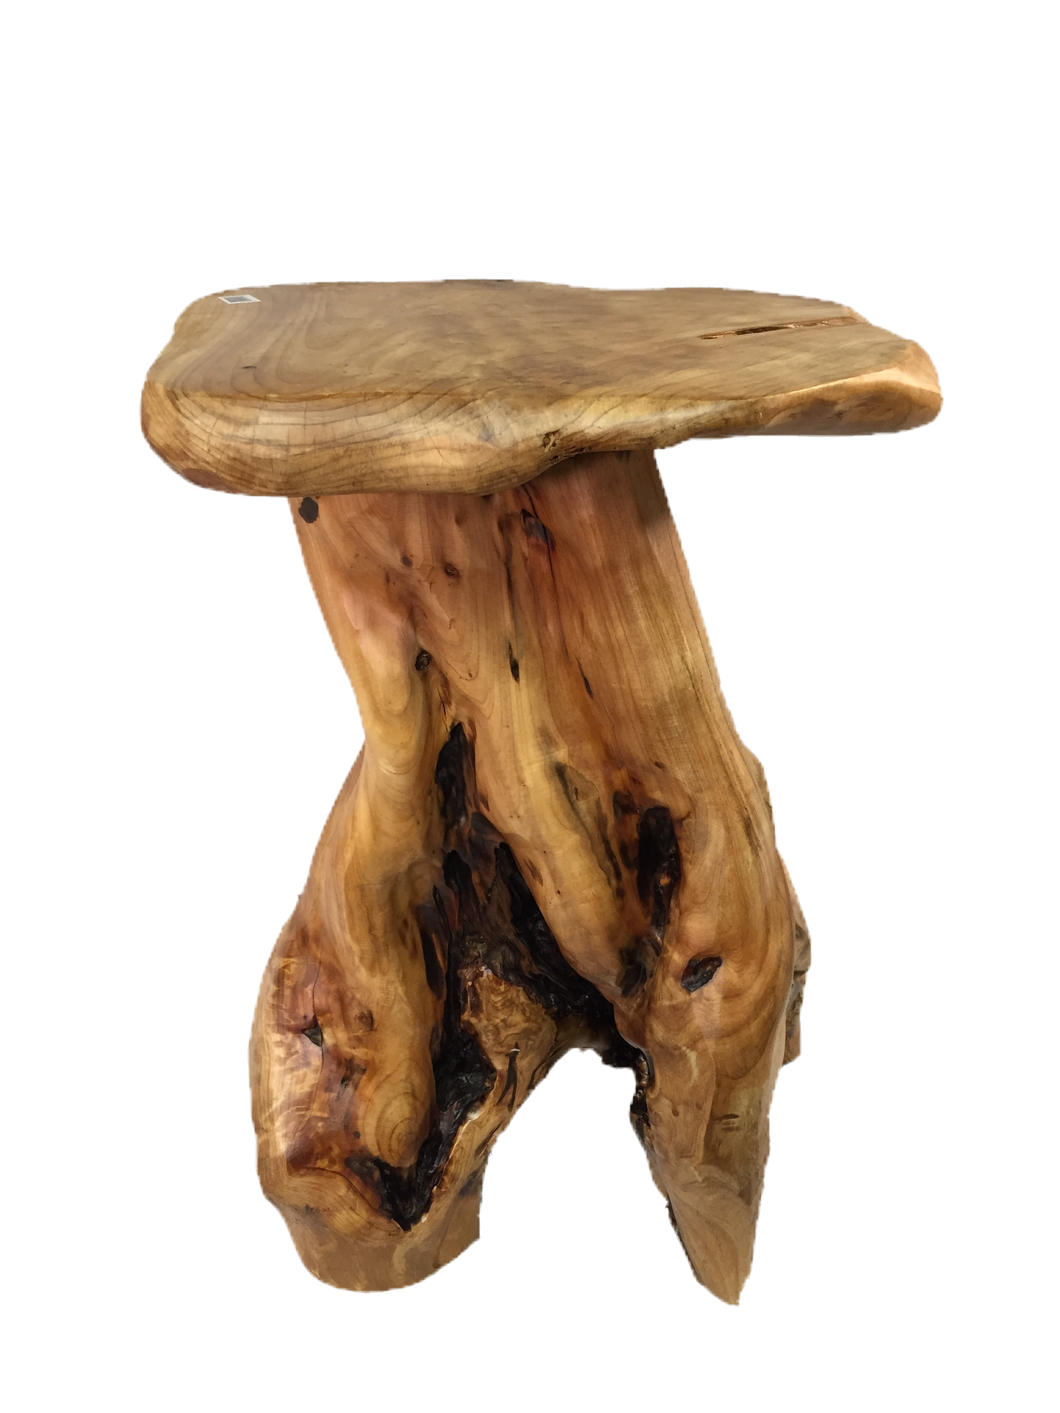 Hand-Crafted Root Wood Live Edge Stool/Plant Stand - 24